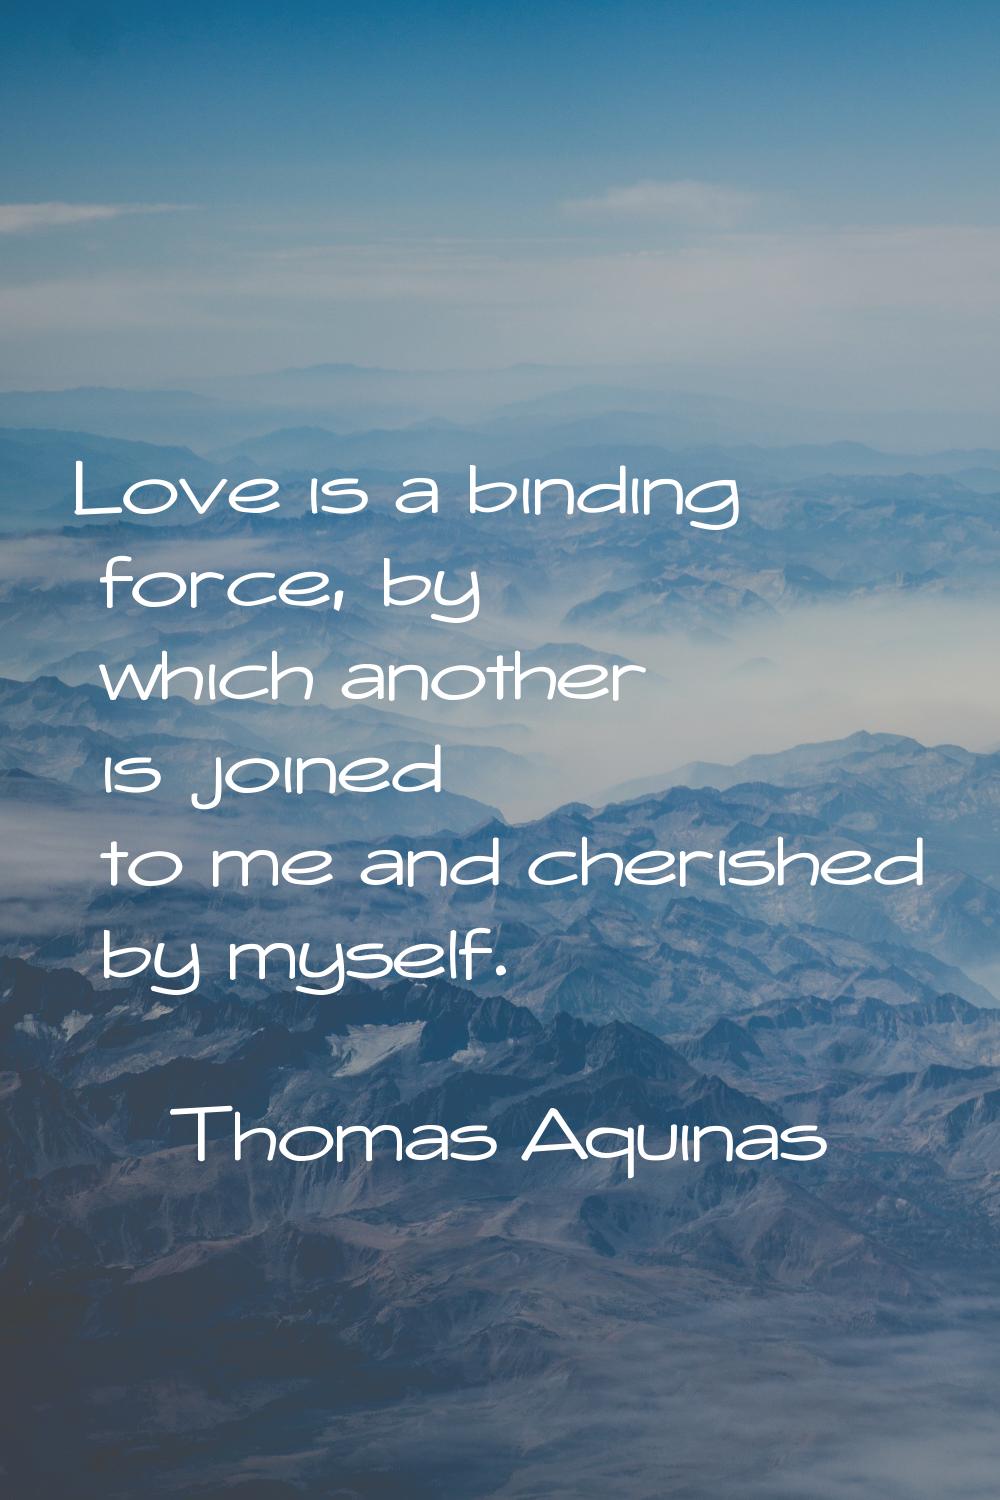 Love is a binding force, by which another is joined to me and cherished by myself.